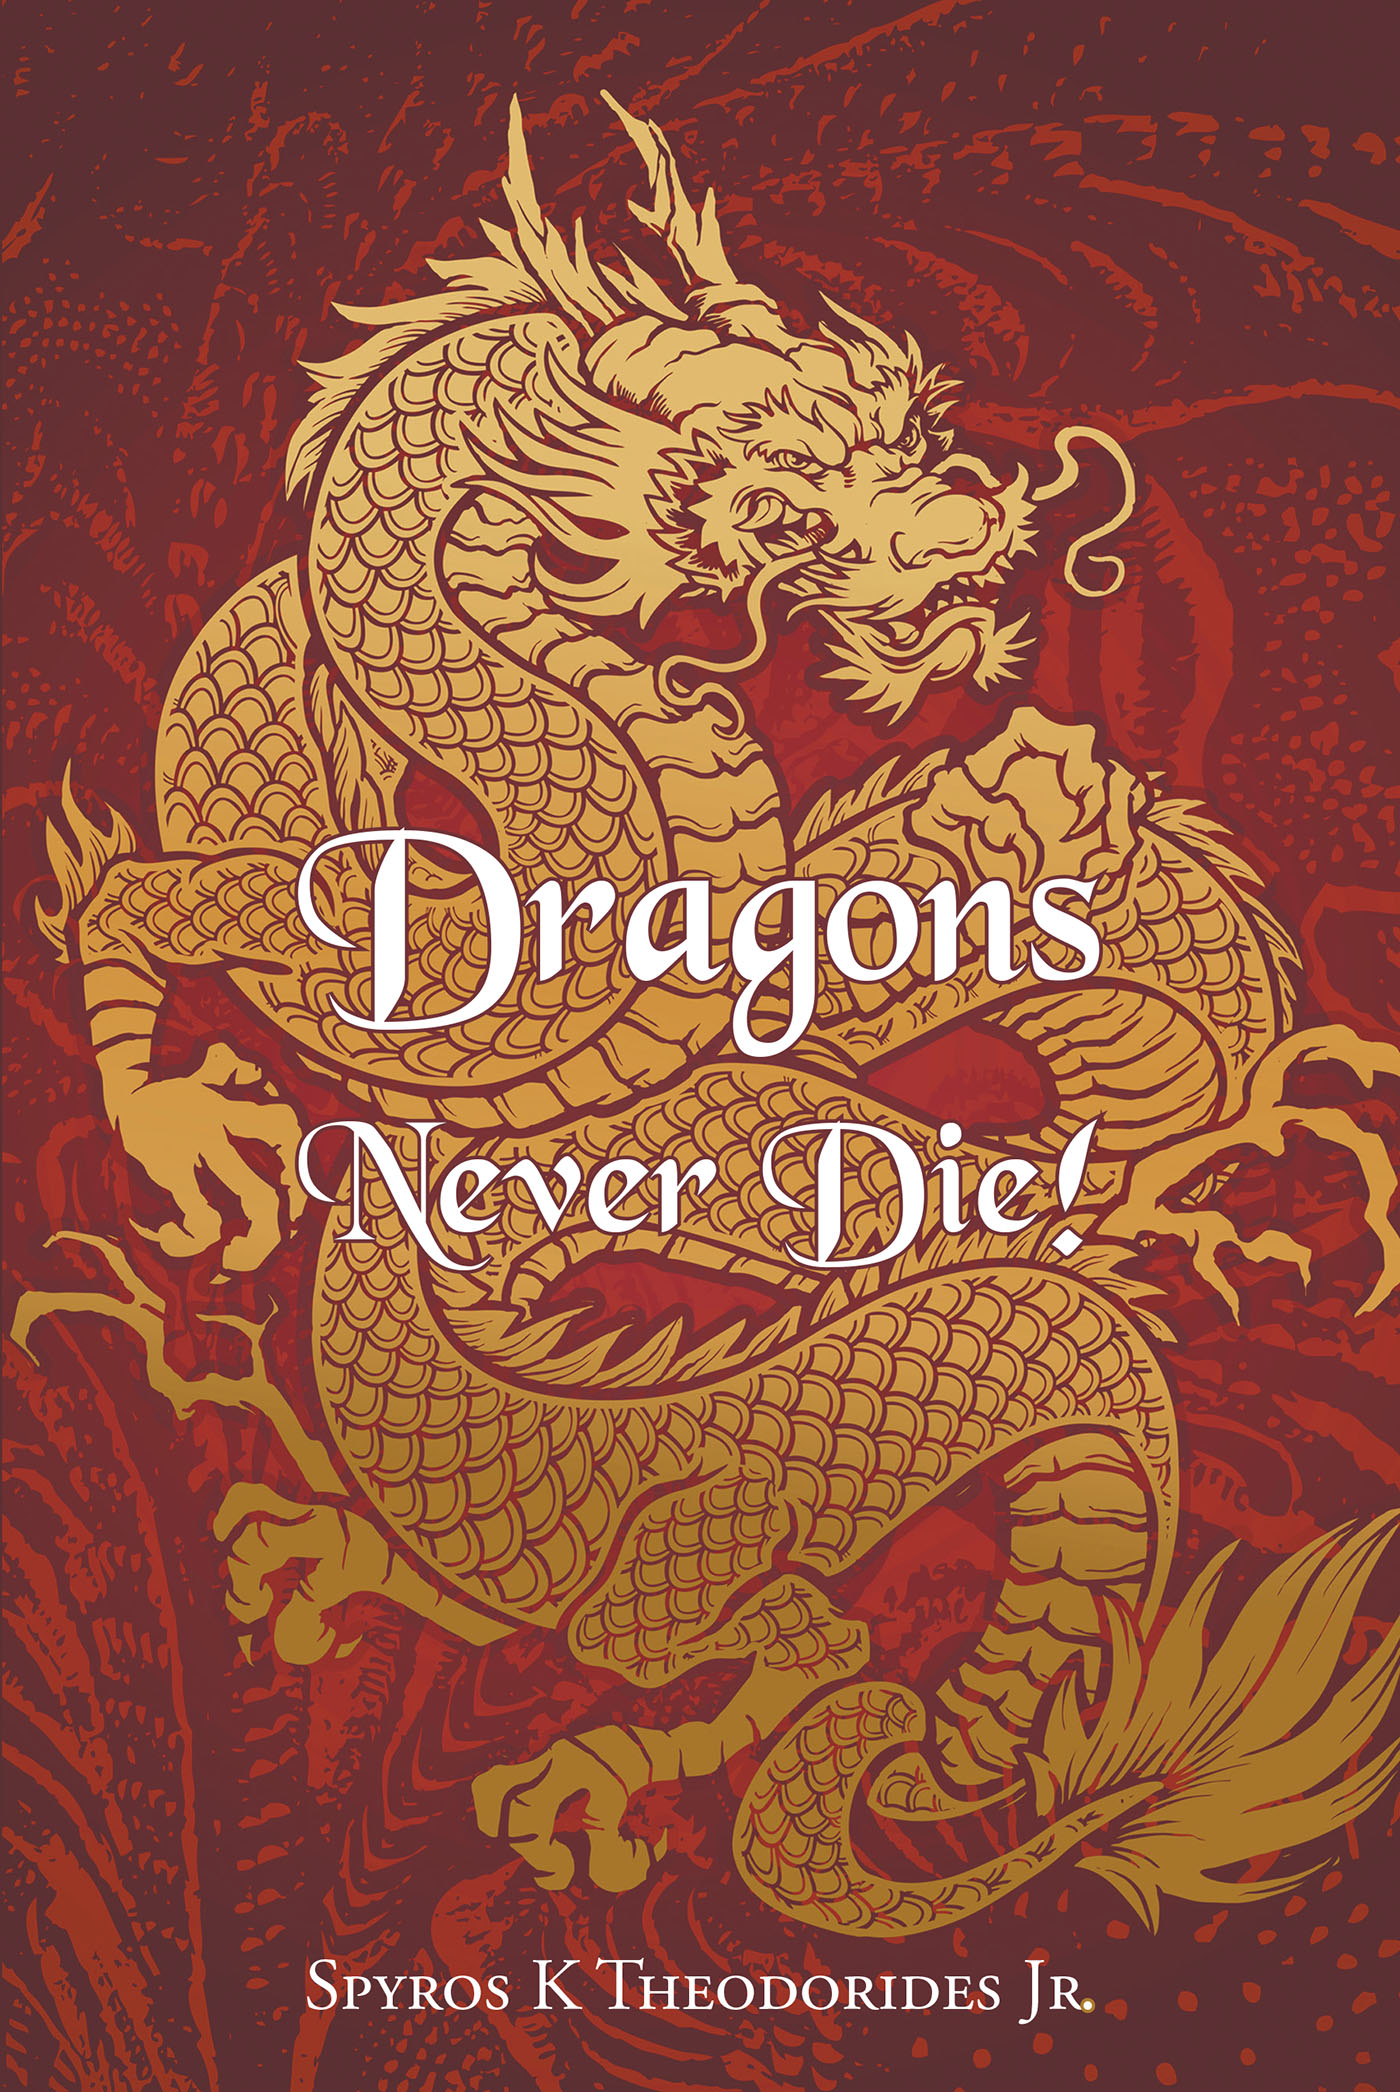 Author Spyros K Theodorides Jr.s new book Dragons Never Die! is a thrilling story of two young women who seek out revenge against a group that killed their parents Newswire